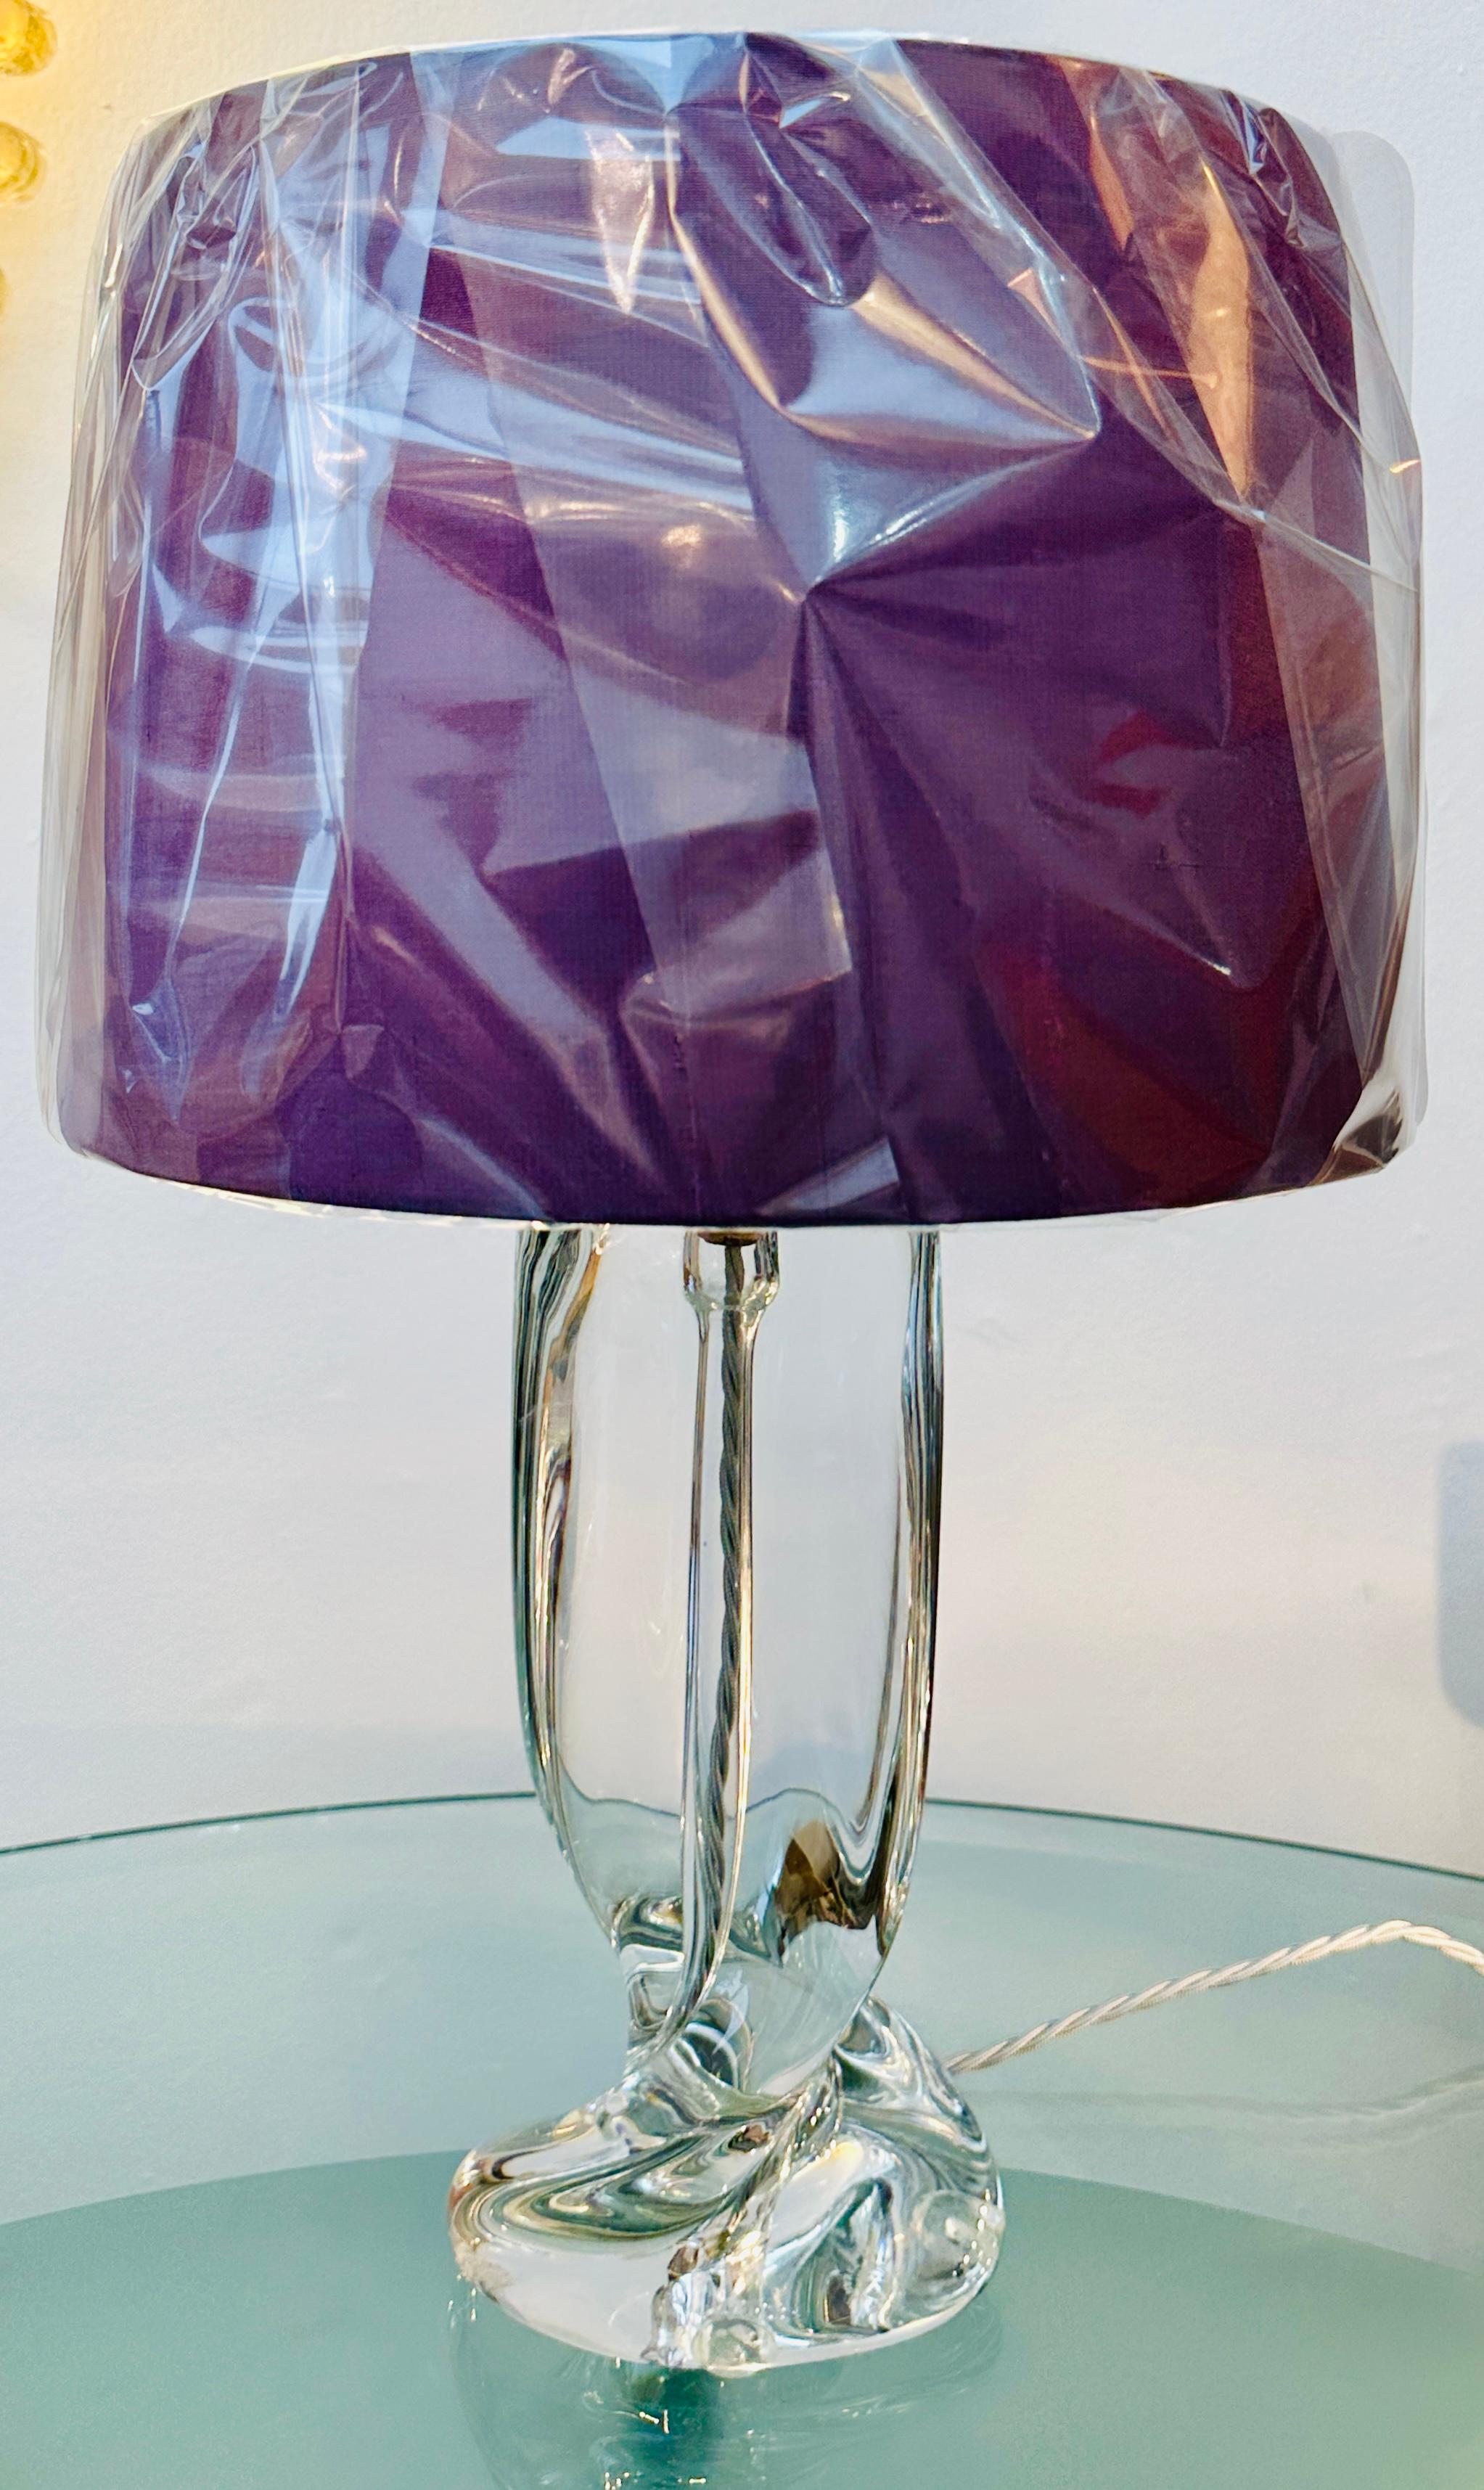 An elegant, sculptural, solid crystal glass table lamp manufactured by the famous French glassmaker Cristalleries De Sèvres. The lamp features a sculptural clear solid glass body which twists towards the base.  The silver twisted silk flex runs